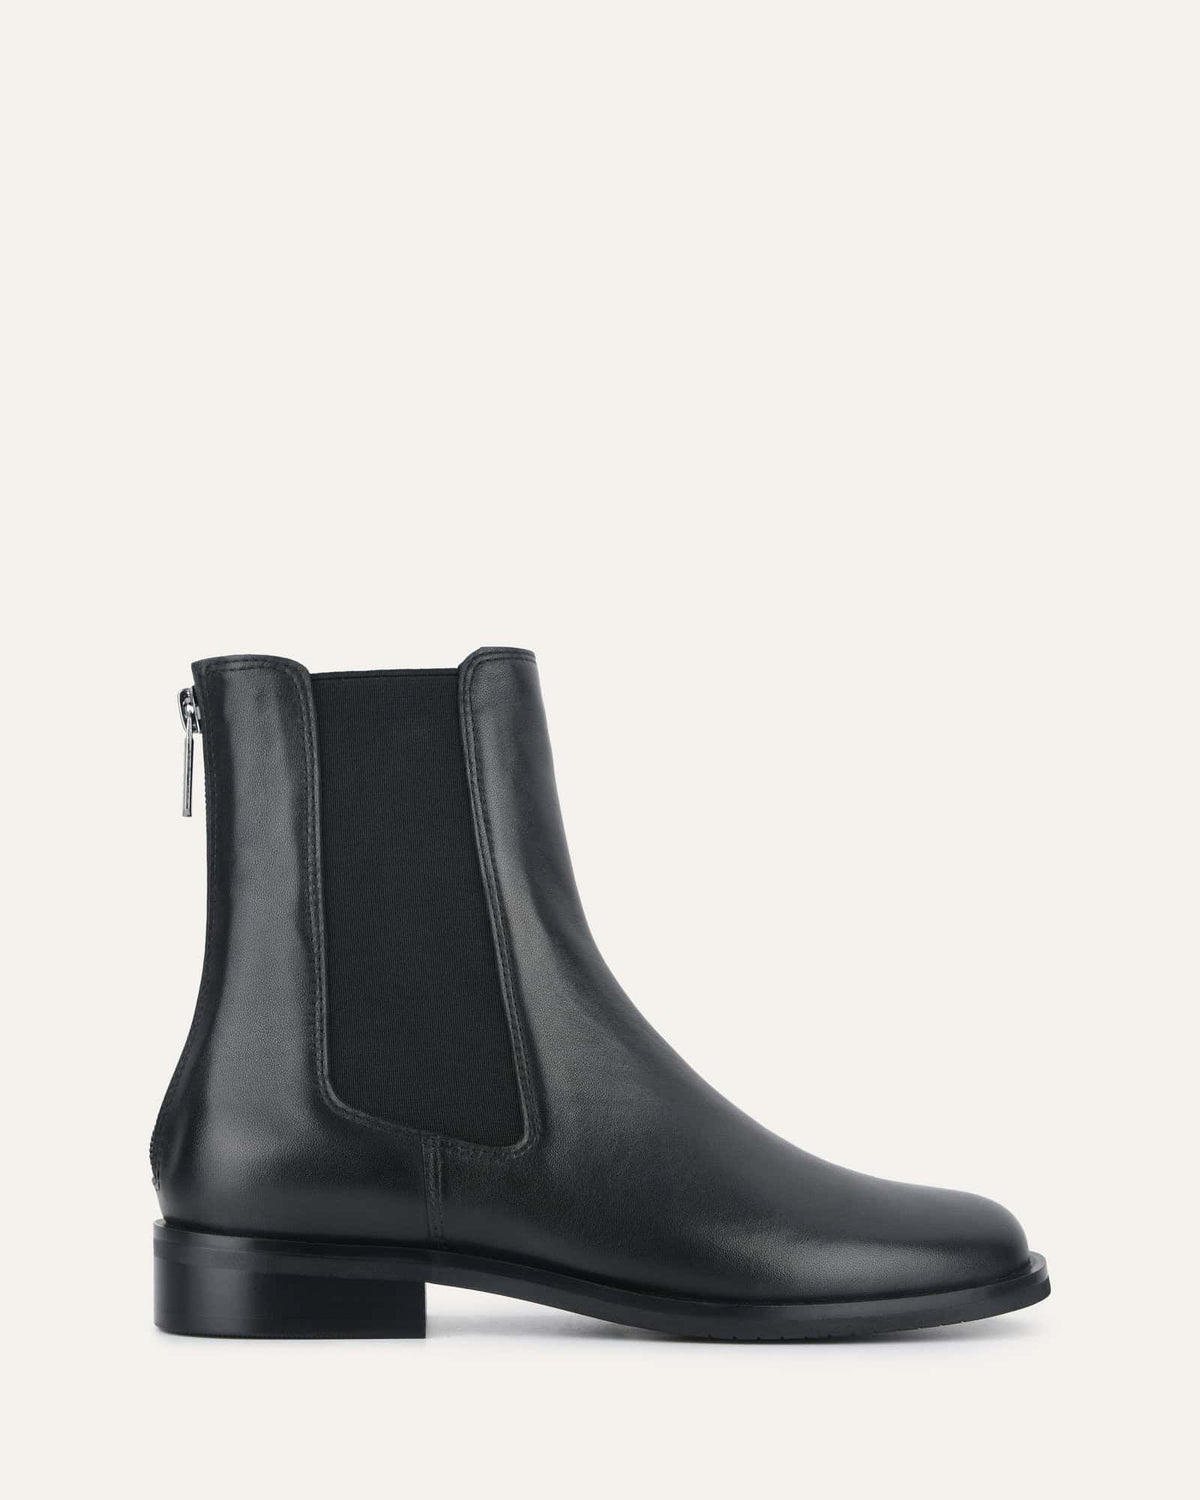 GABE FLAT ANKLE BOOT BLACK LEATHER